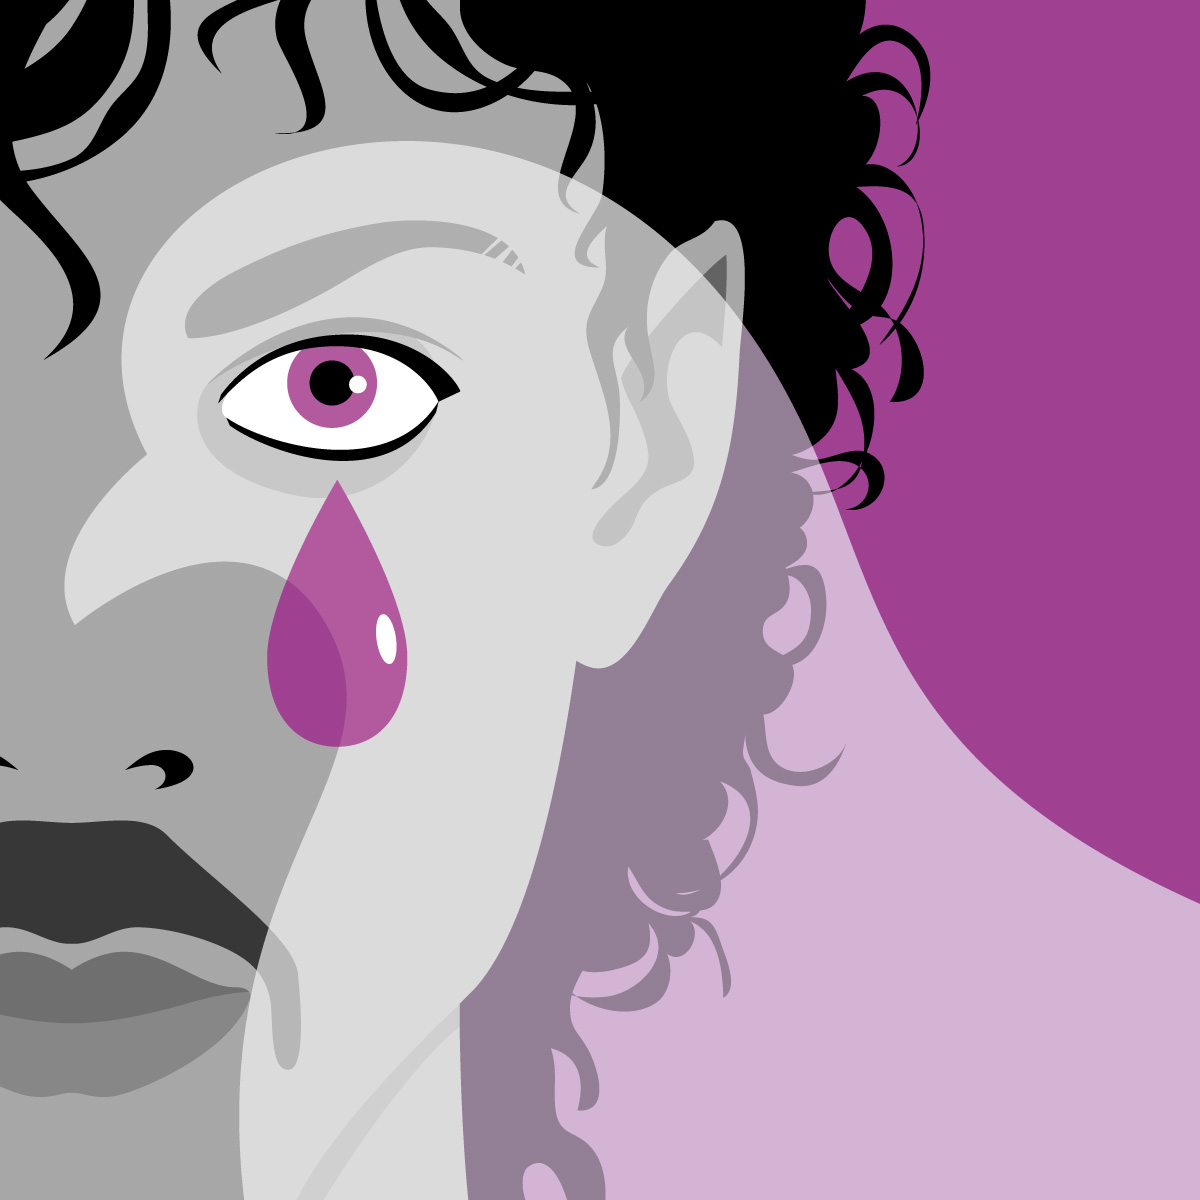 Prince Rogers Nelson illustration